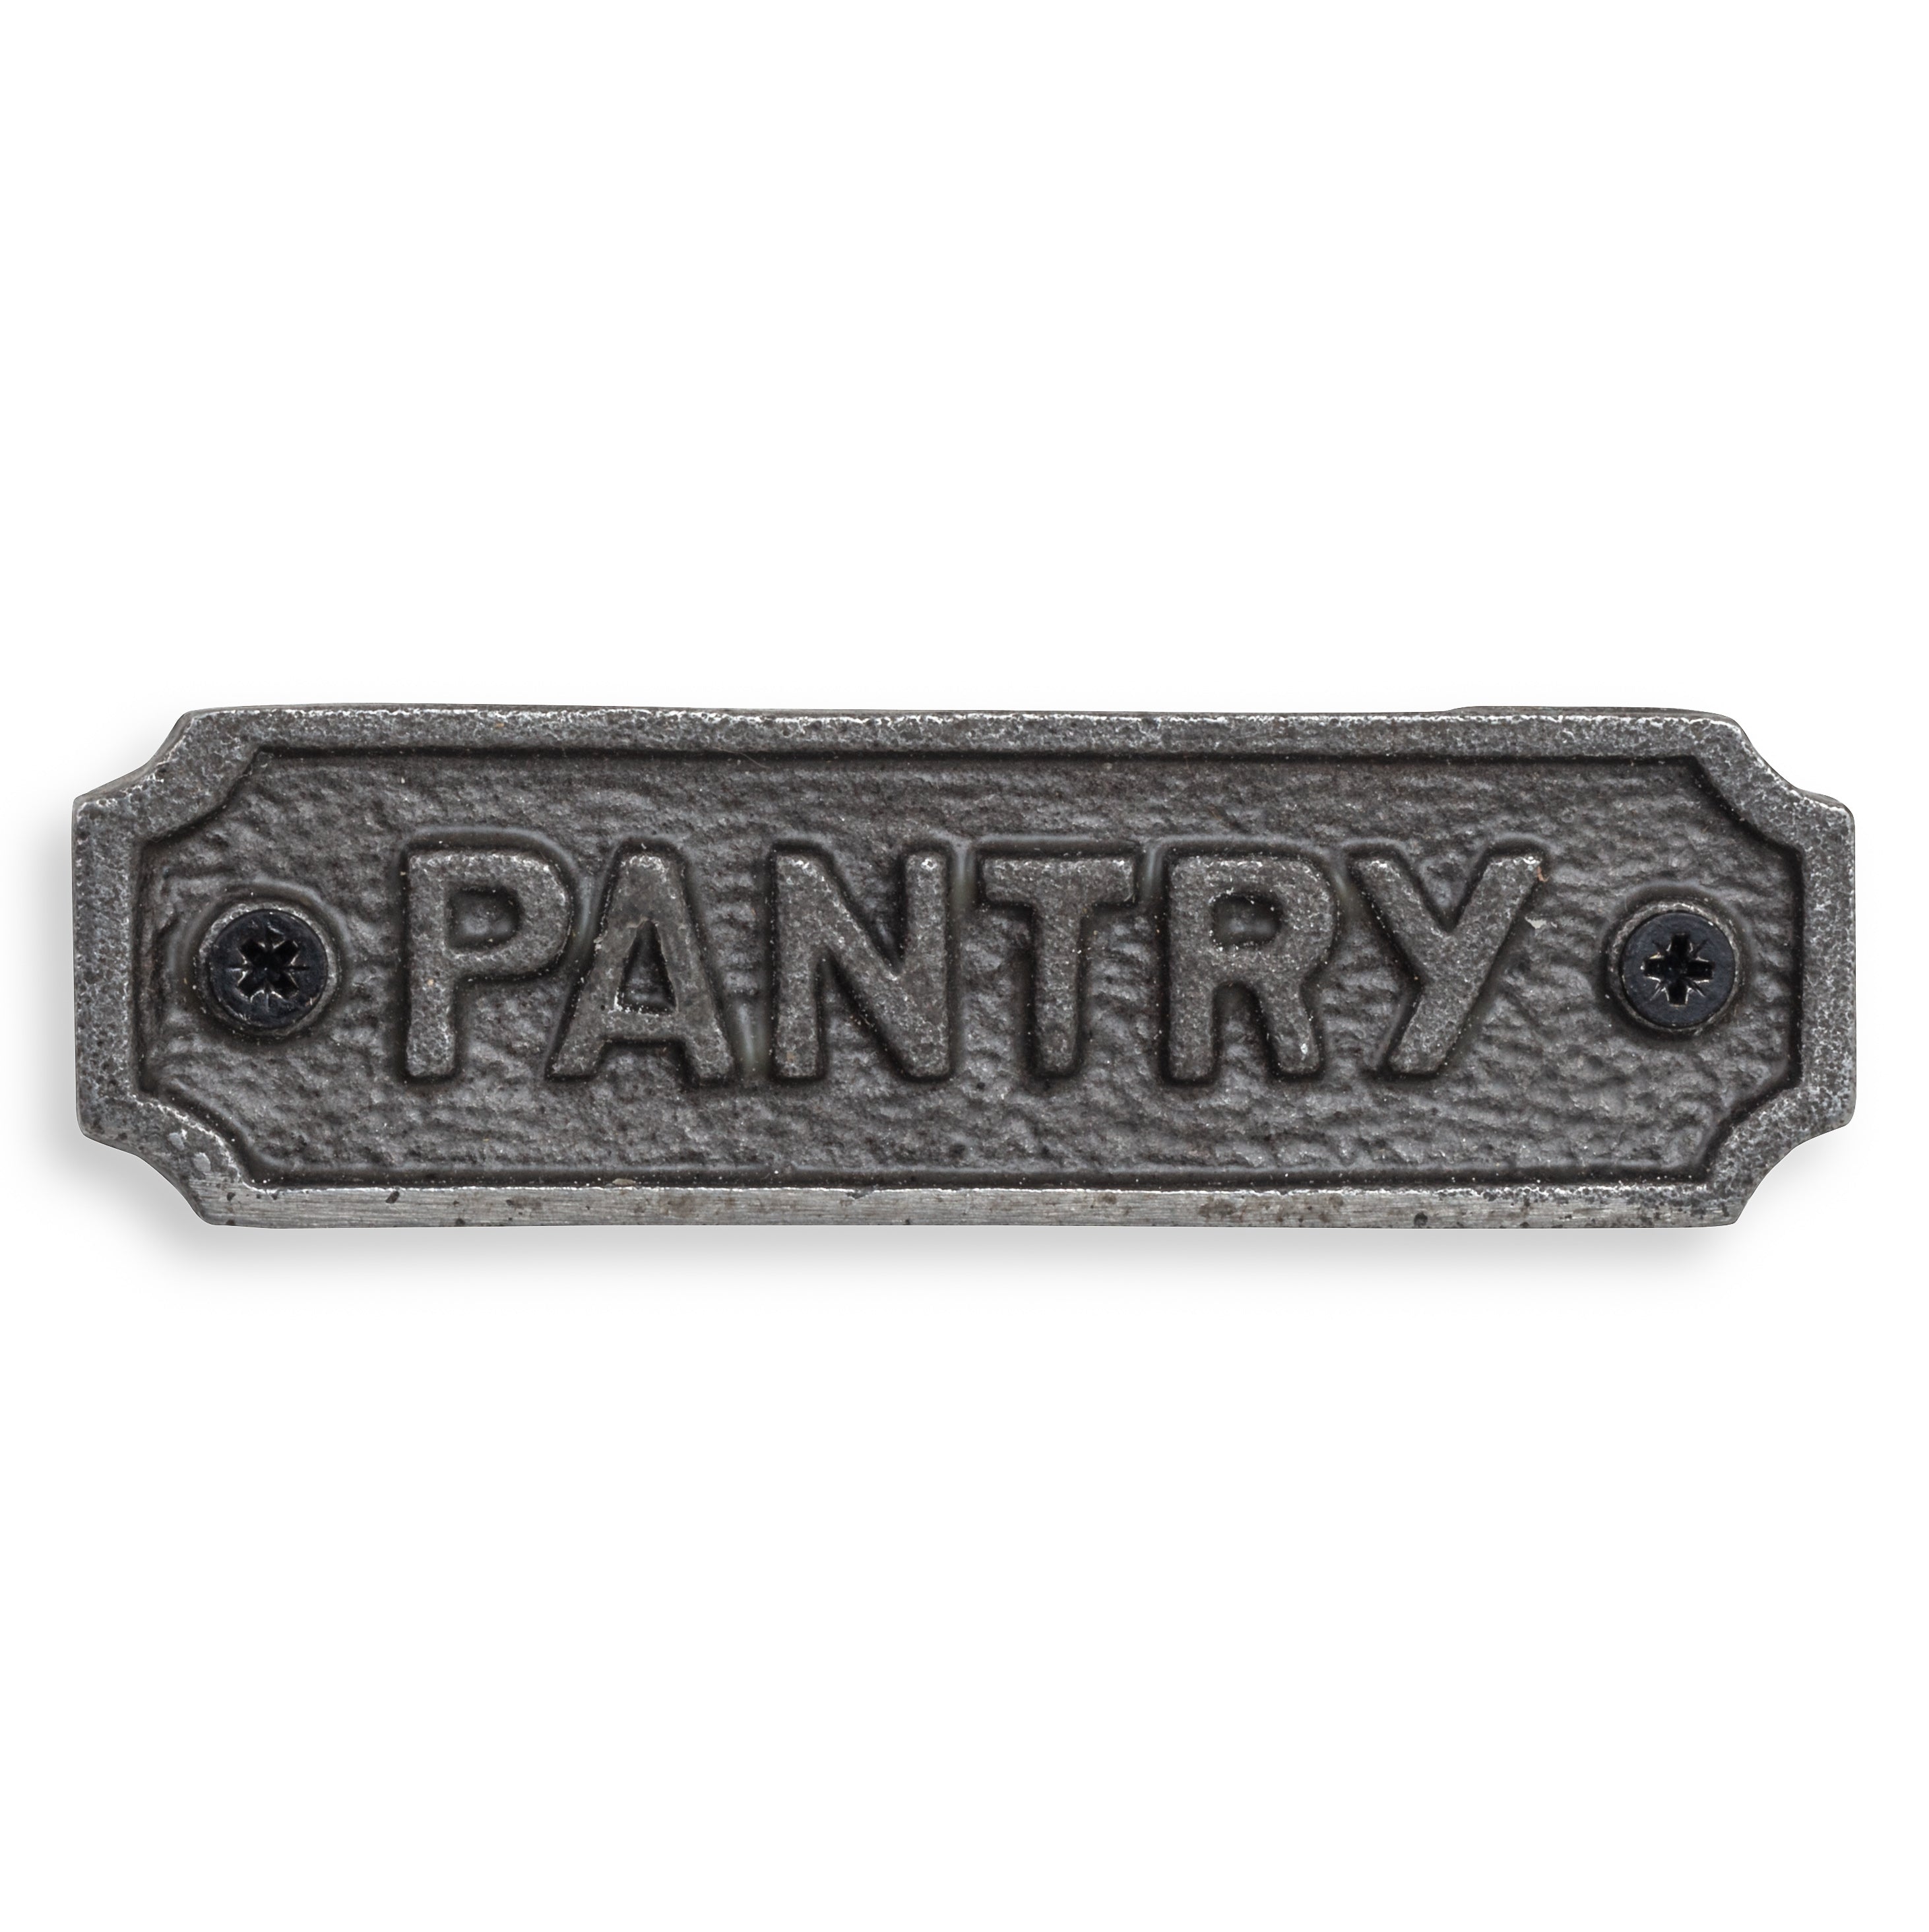 Pantry Door Sign - Outlet - Save 20%